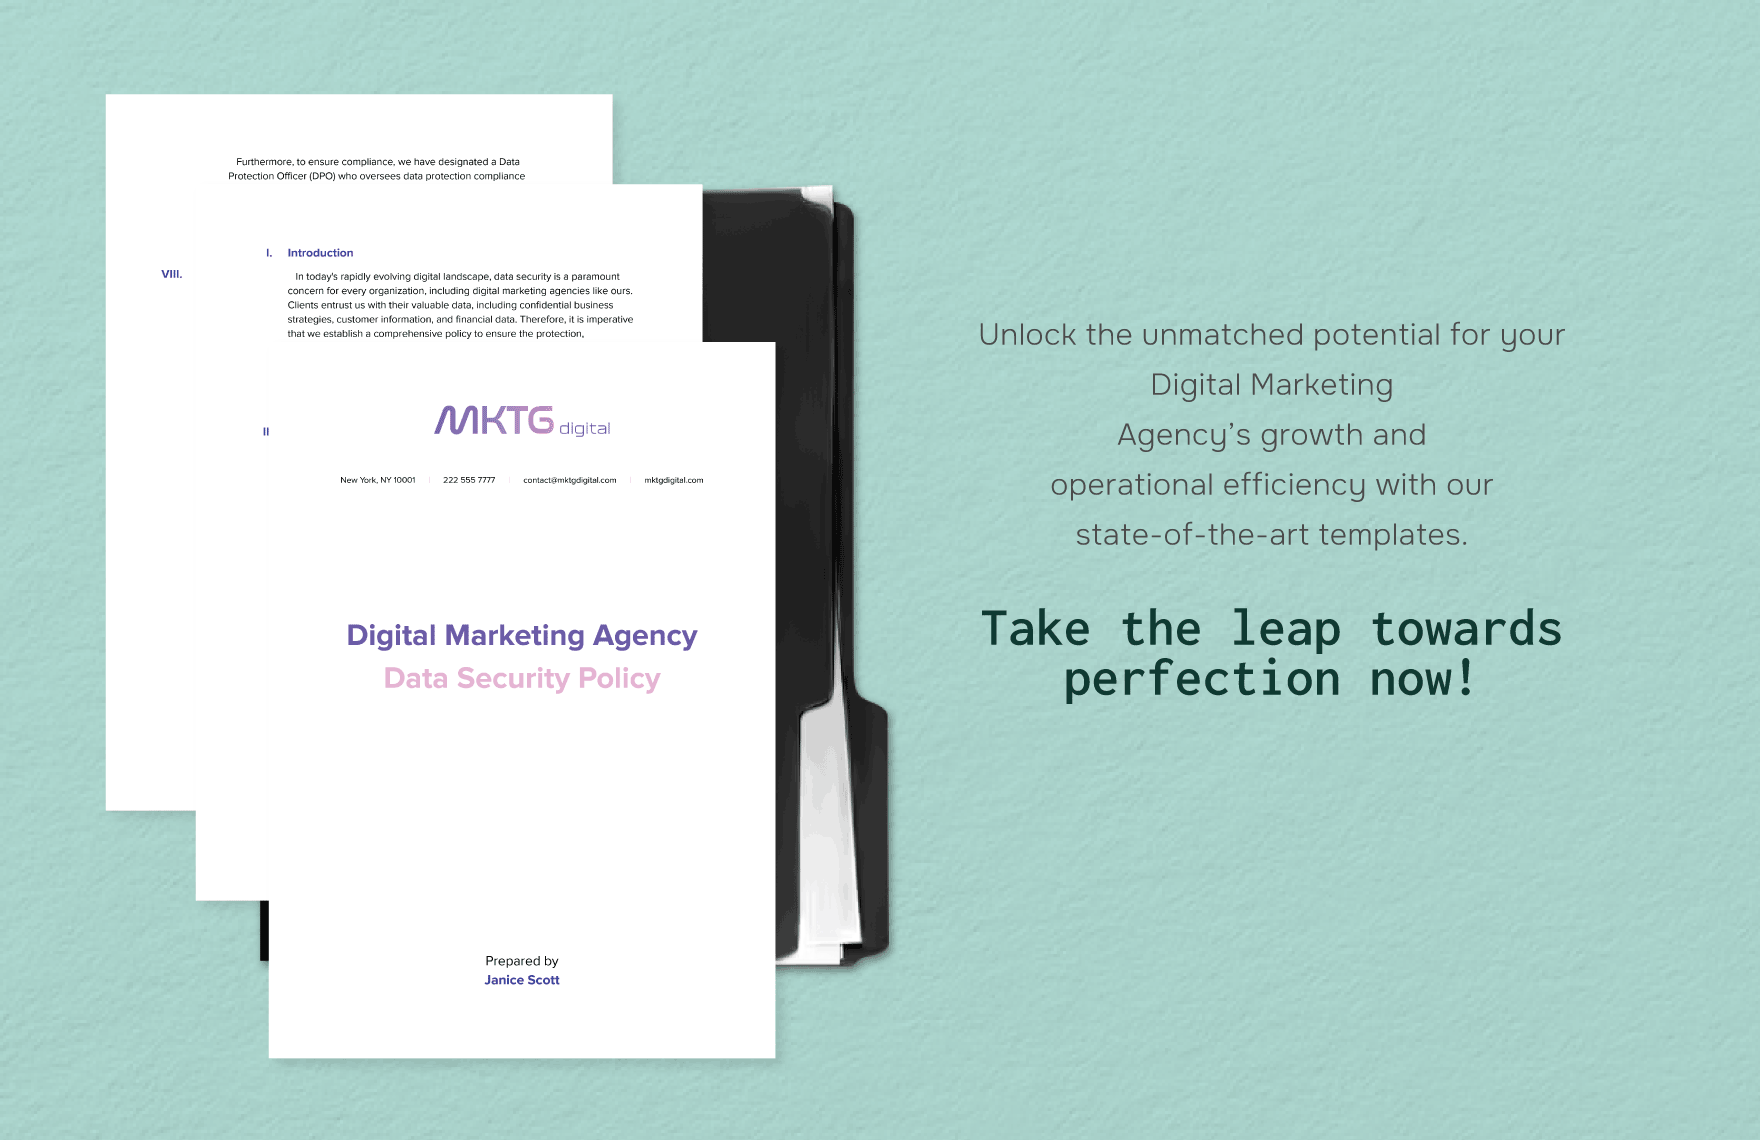 Digital Marketing Agency Data Security Policy Template